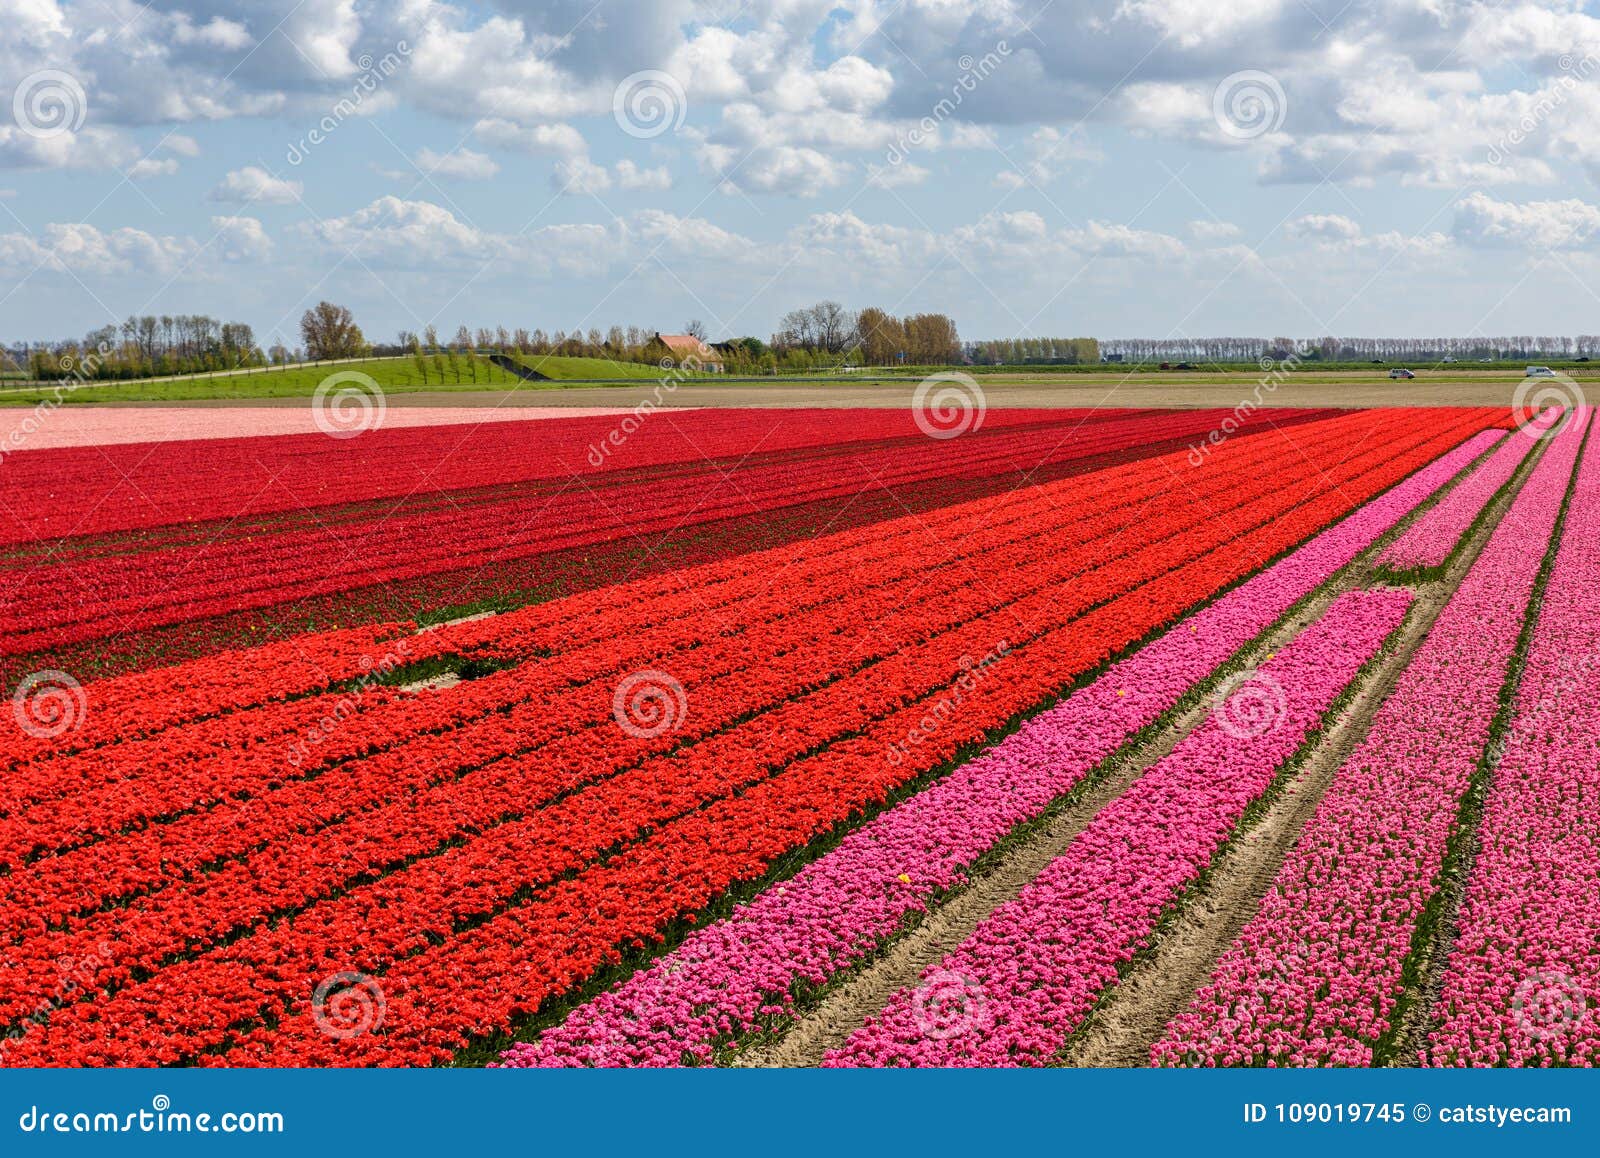 Tulip Fields with Red and Pink Tulips Stock Image - Image of colorful ...